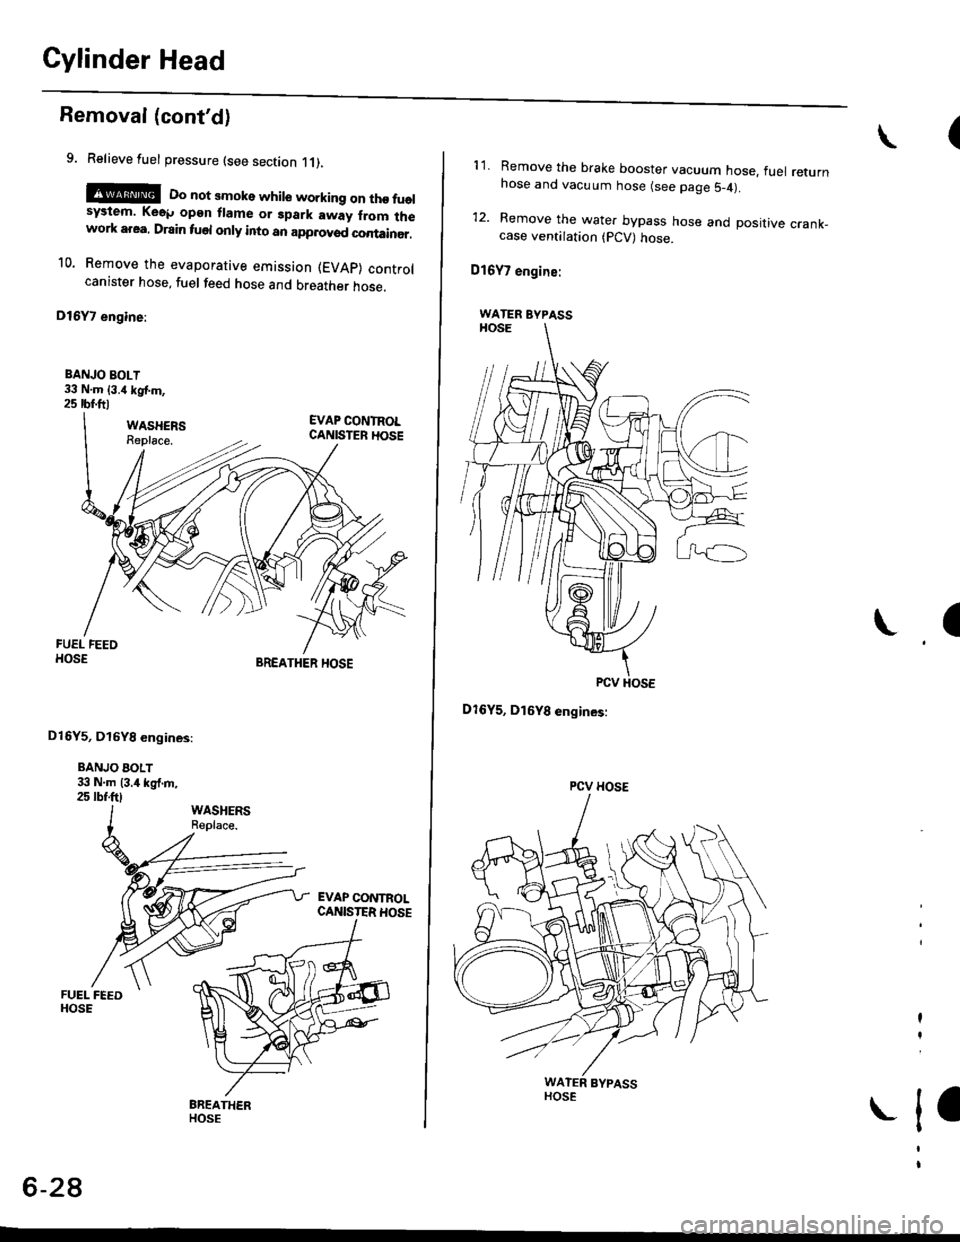 HONDA CIVIC 1996 6.G Owners Manual Cylinder Head
Removal (contd)
9. Relieve fuel pressure (see section 11),
E@E Do not smoke while working on tho fuelsystem. Ke6p opgn flame or gpark away from lhework area, Drain fuel only into an app